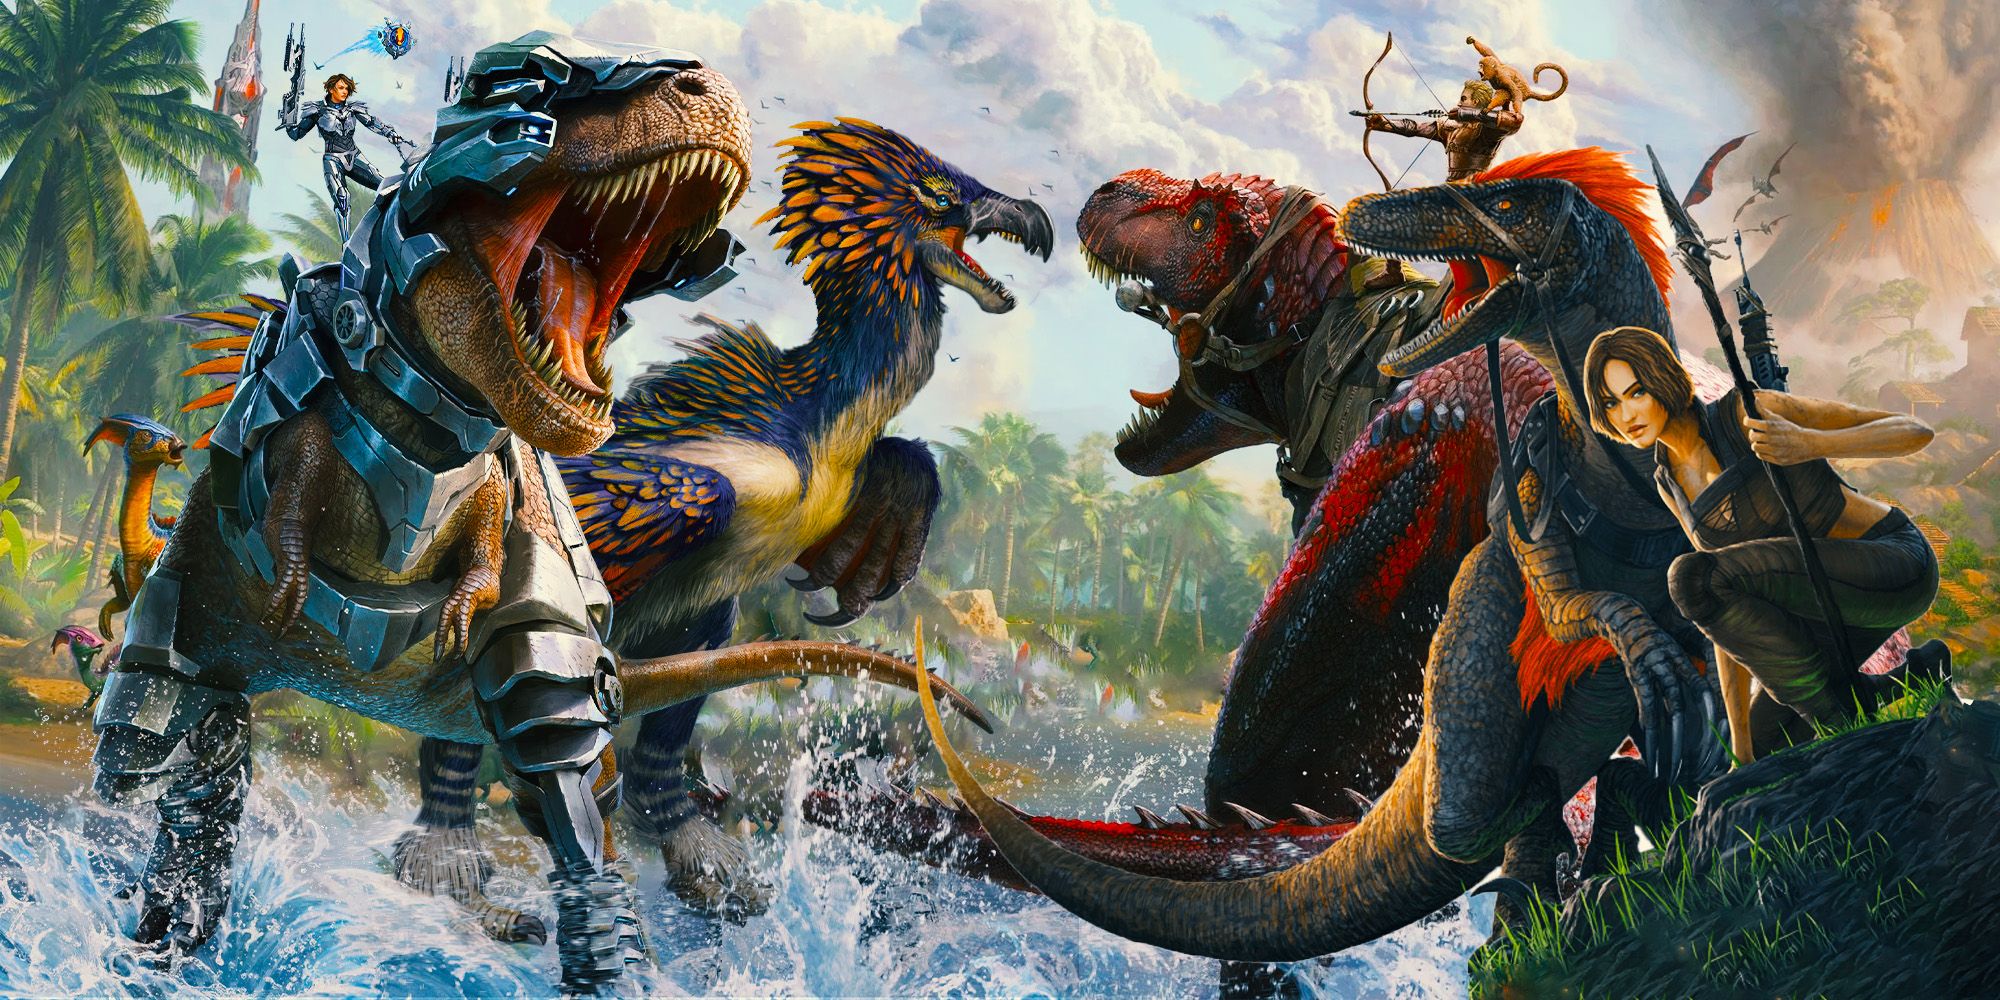 A few different kinds of dinosaurs battling against each other. 